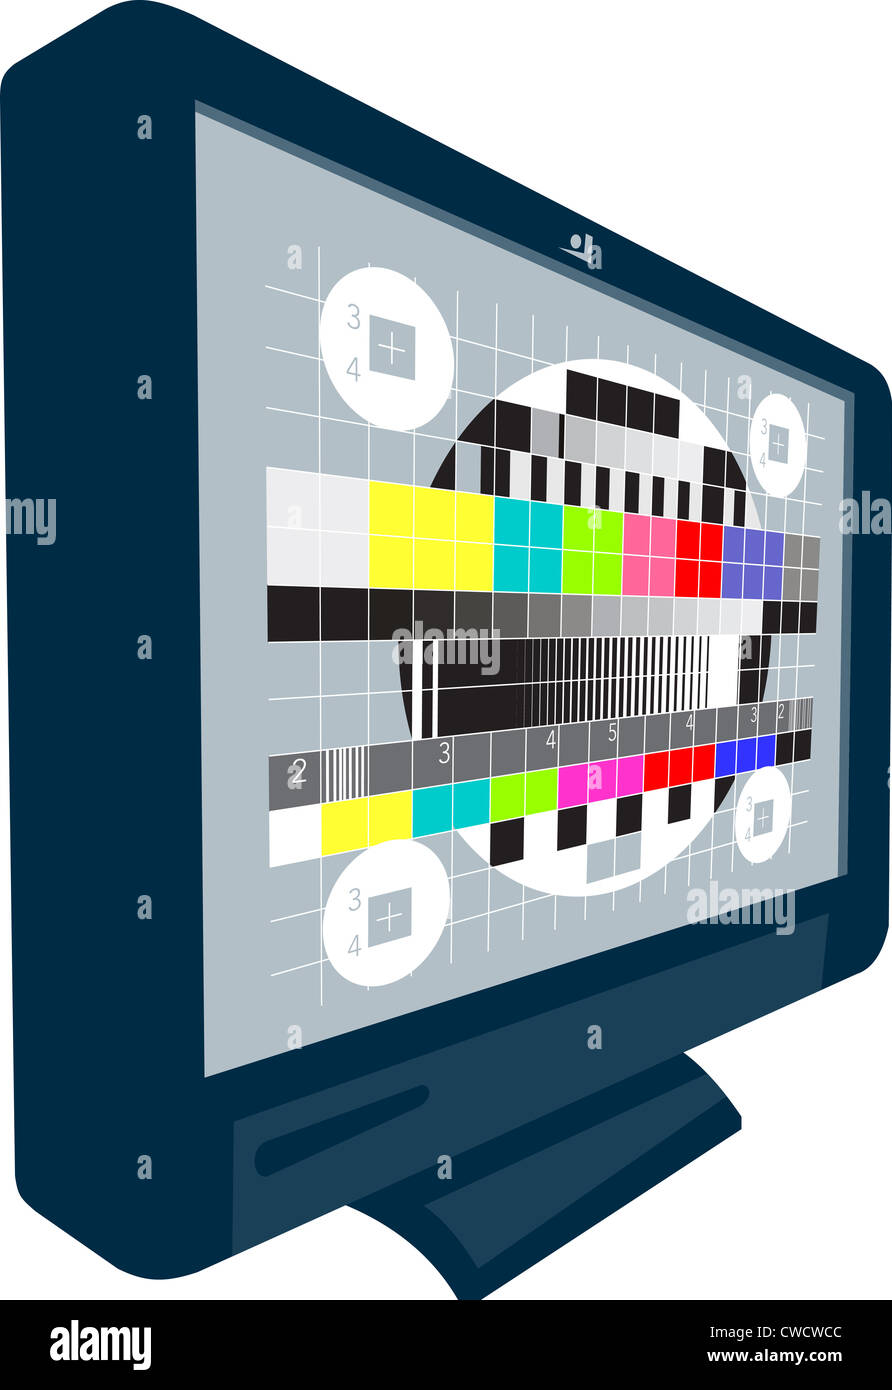 Illustration of an LCD Plasma television TV set on isolated white background. with test signal pattern. Stock Photo